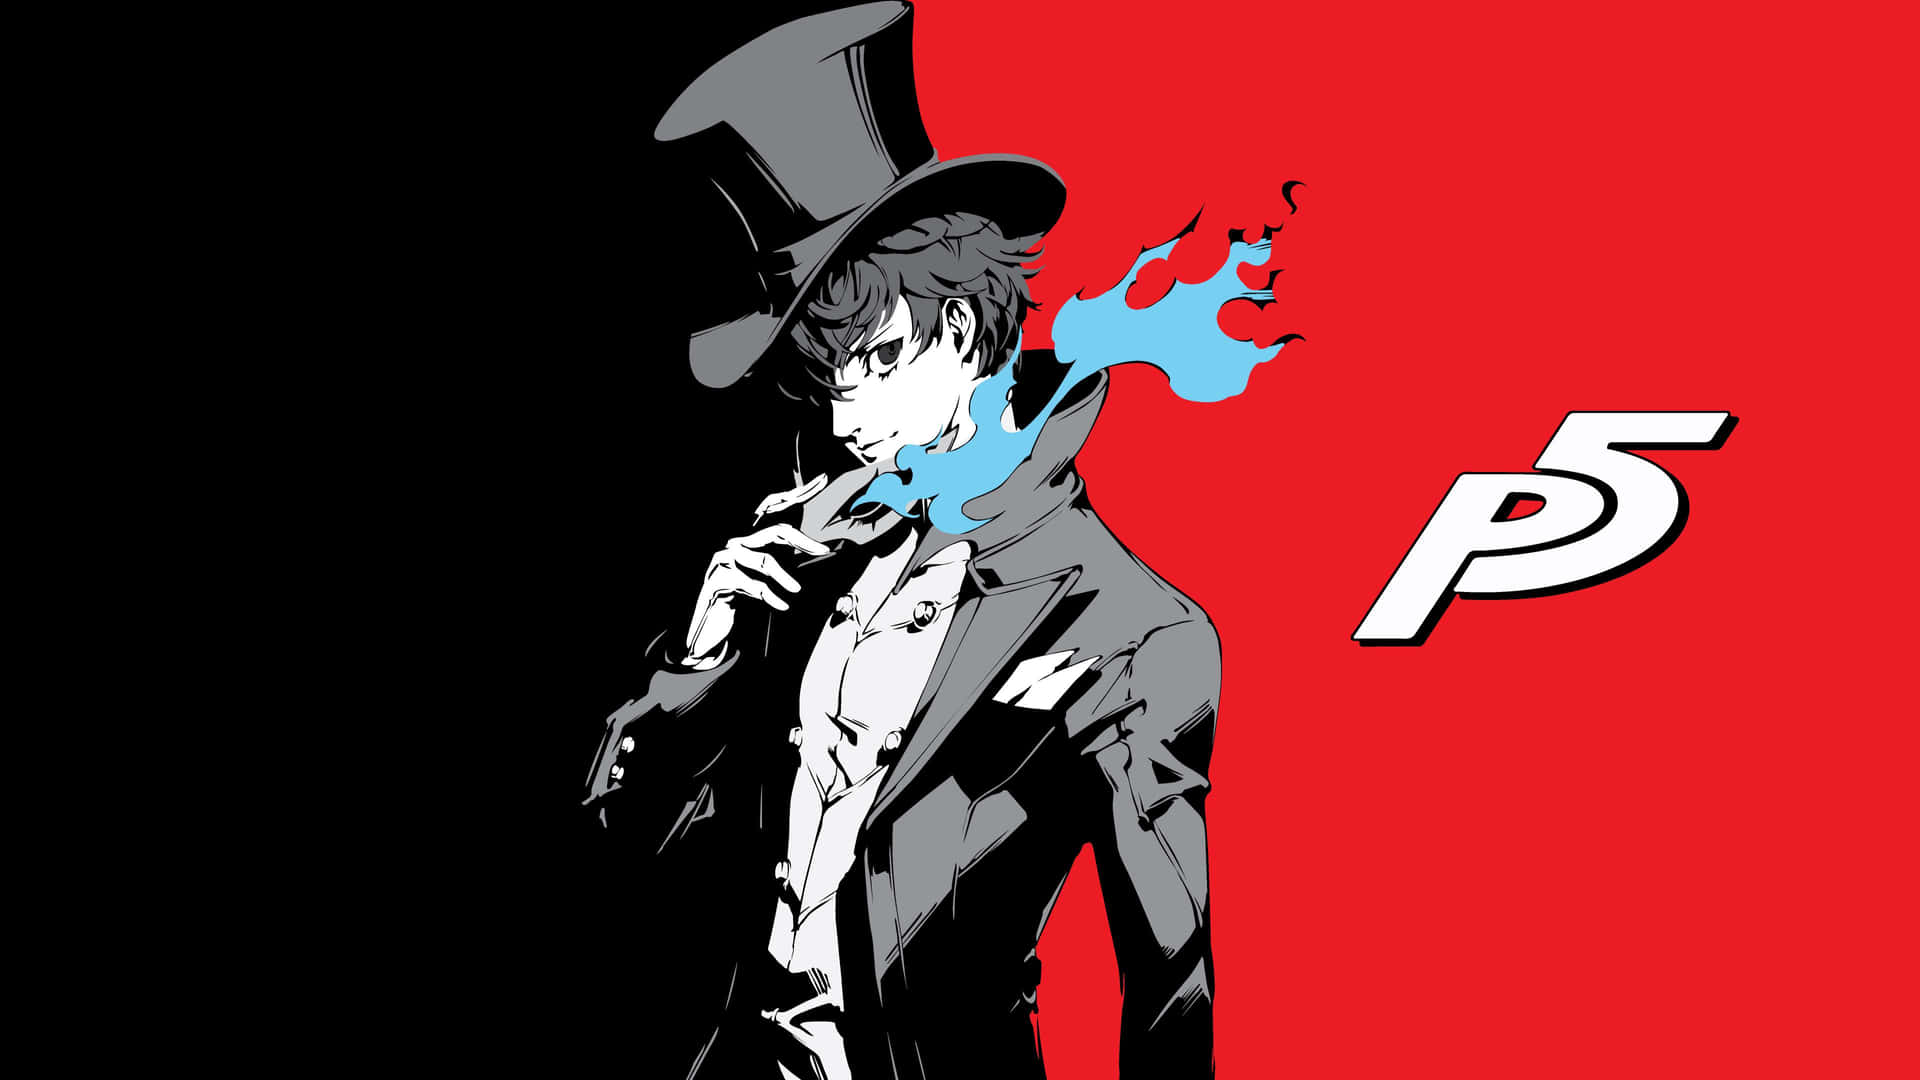 The Phantom Thieves in Action - Persona 5 Strikers Wallpaper